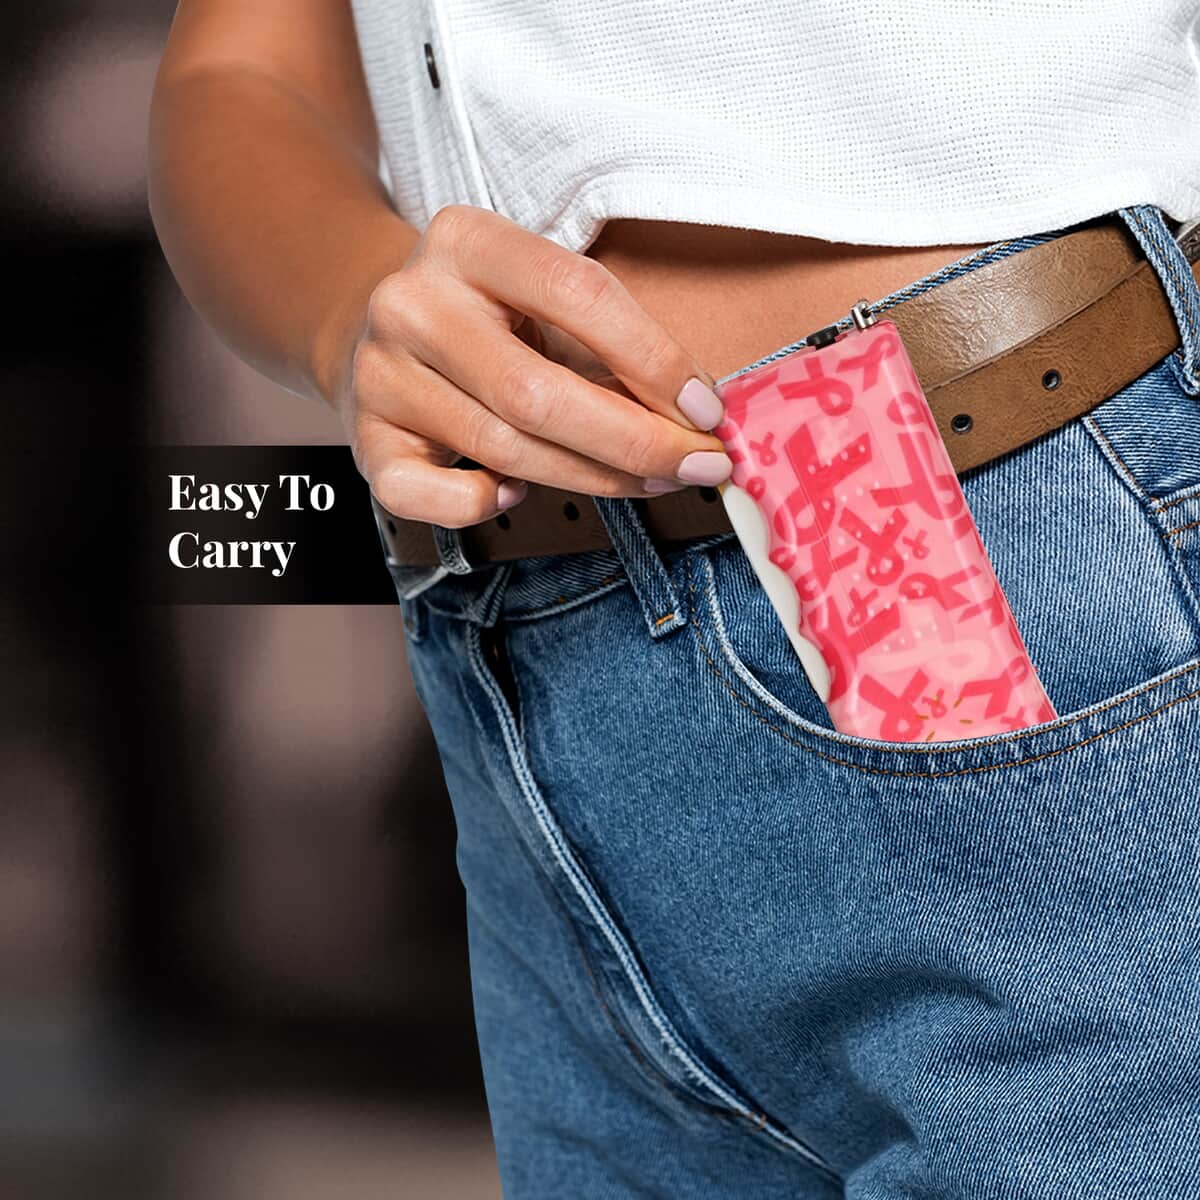 Streetwise Pink Cancer Awareness Ribbon Stun Gun with Flash Light, Alarm and Carry Case (5x1.5) image number 5